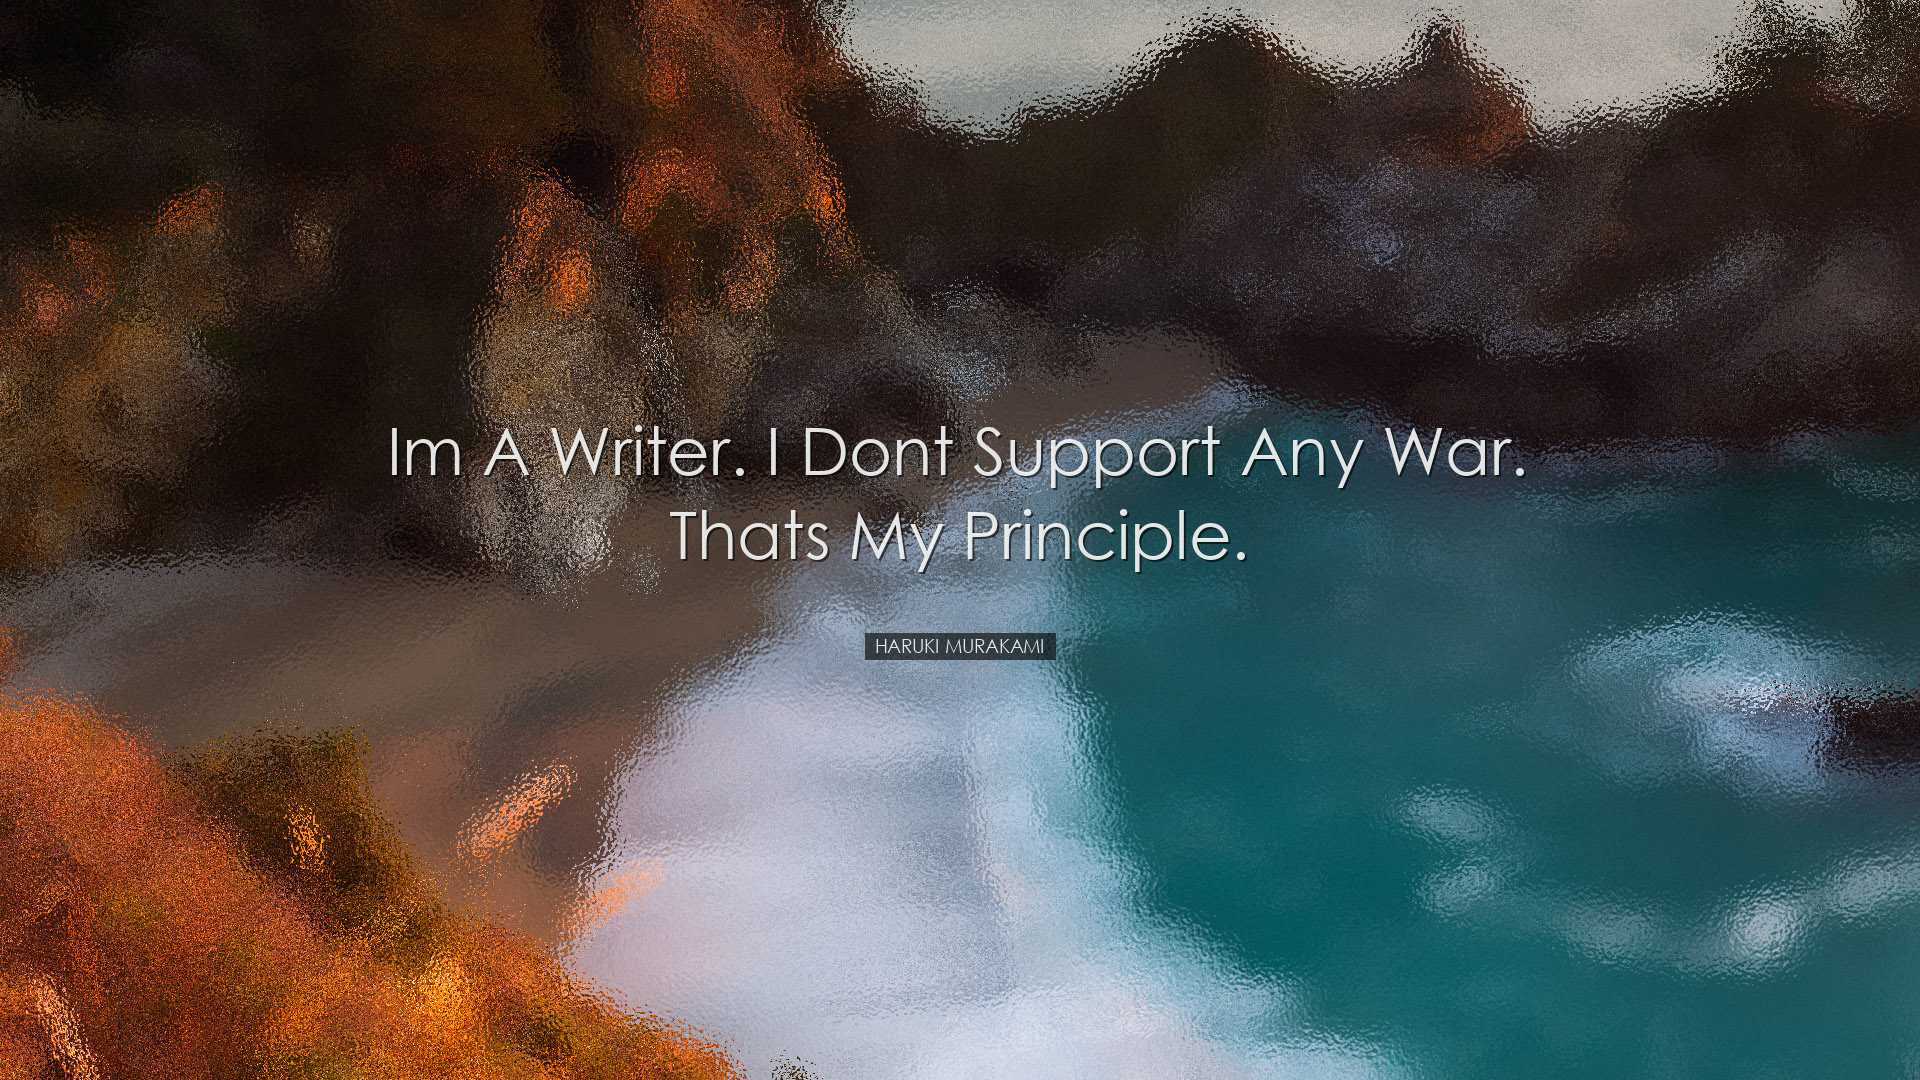 Im a writer. I dont support any war. Thats my principle. - Haruki